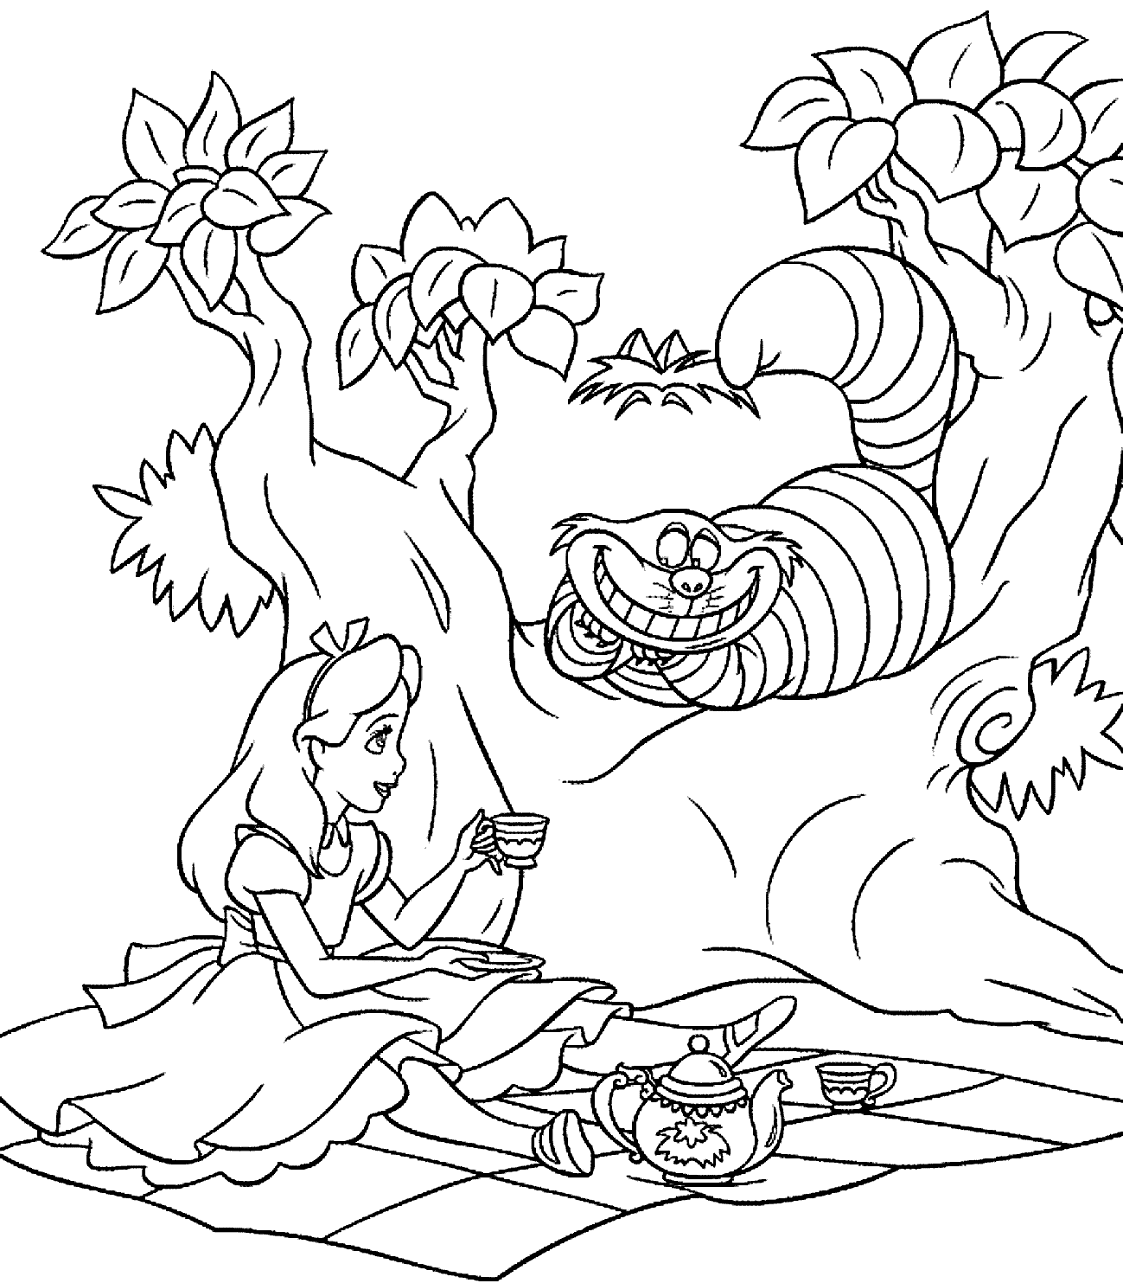 Alice and Cheshire Cat Coloring Pages